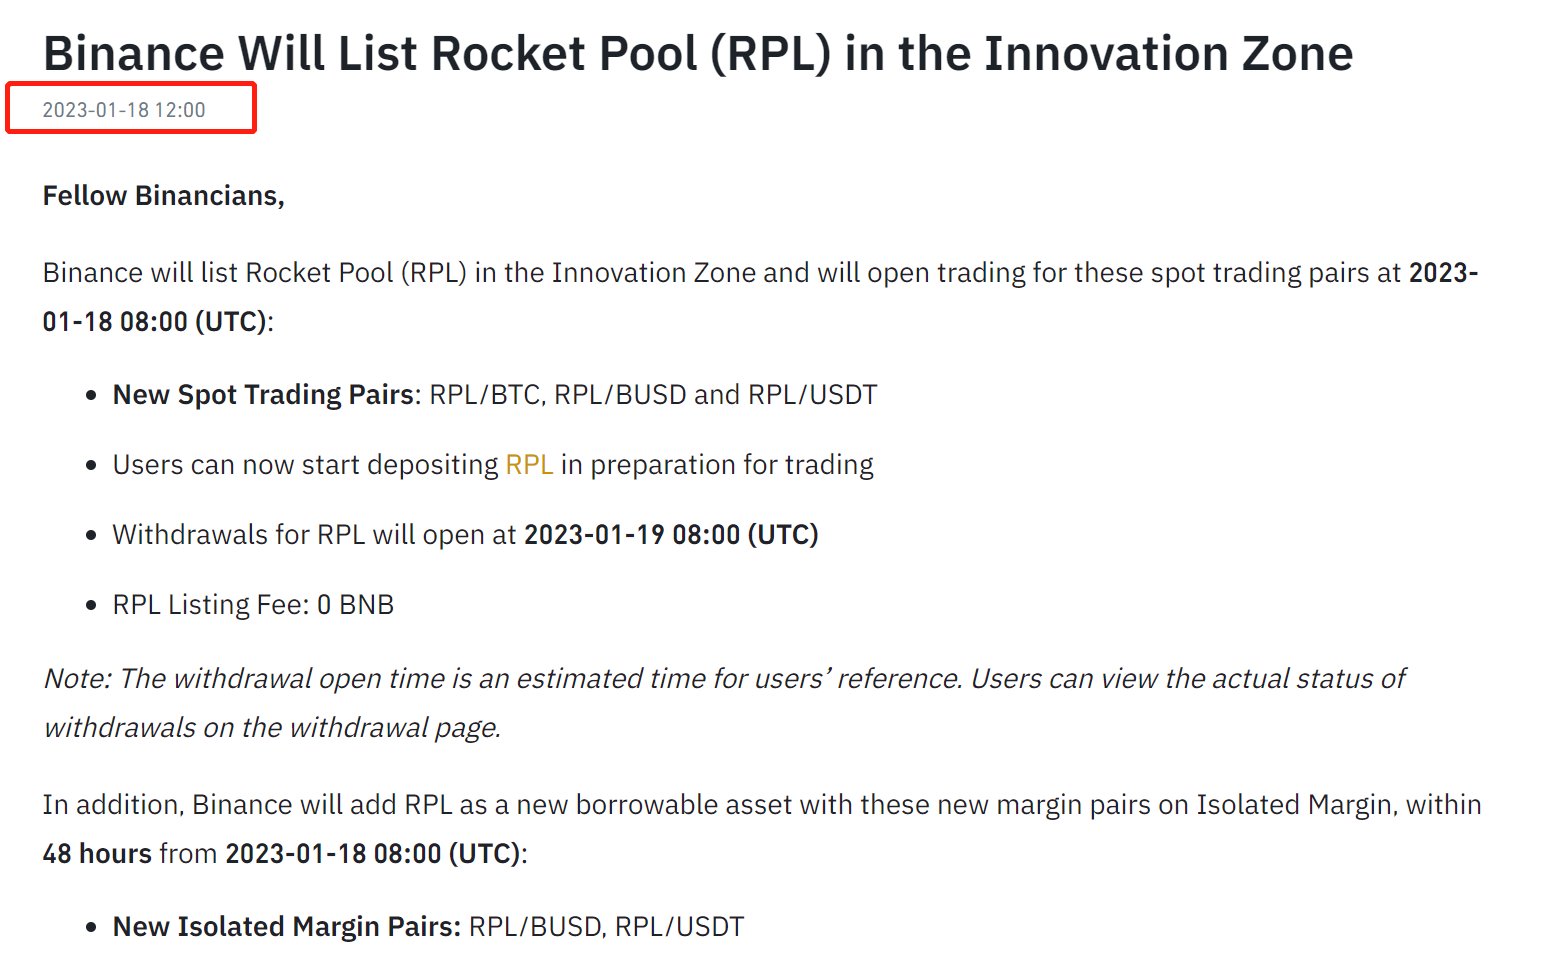 Announcement of RPL Listing